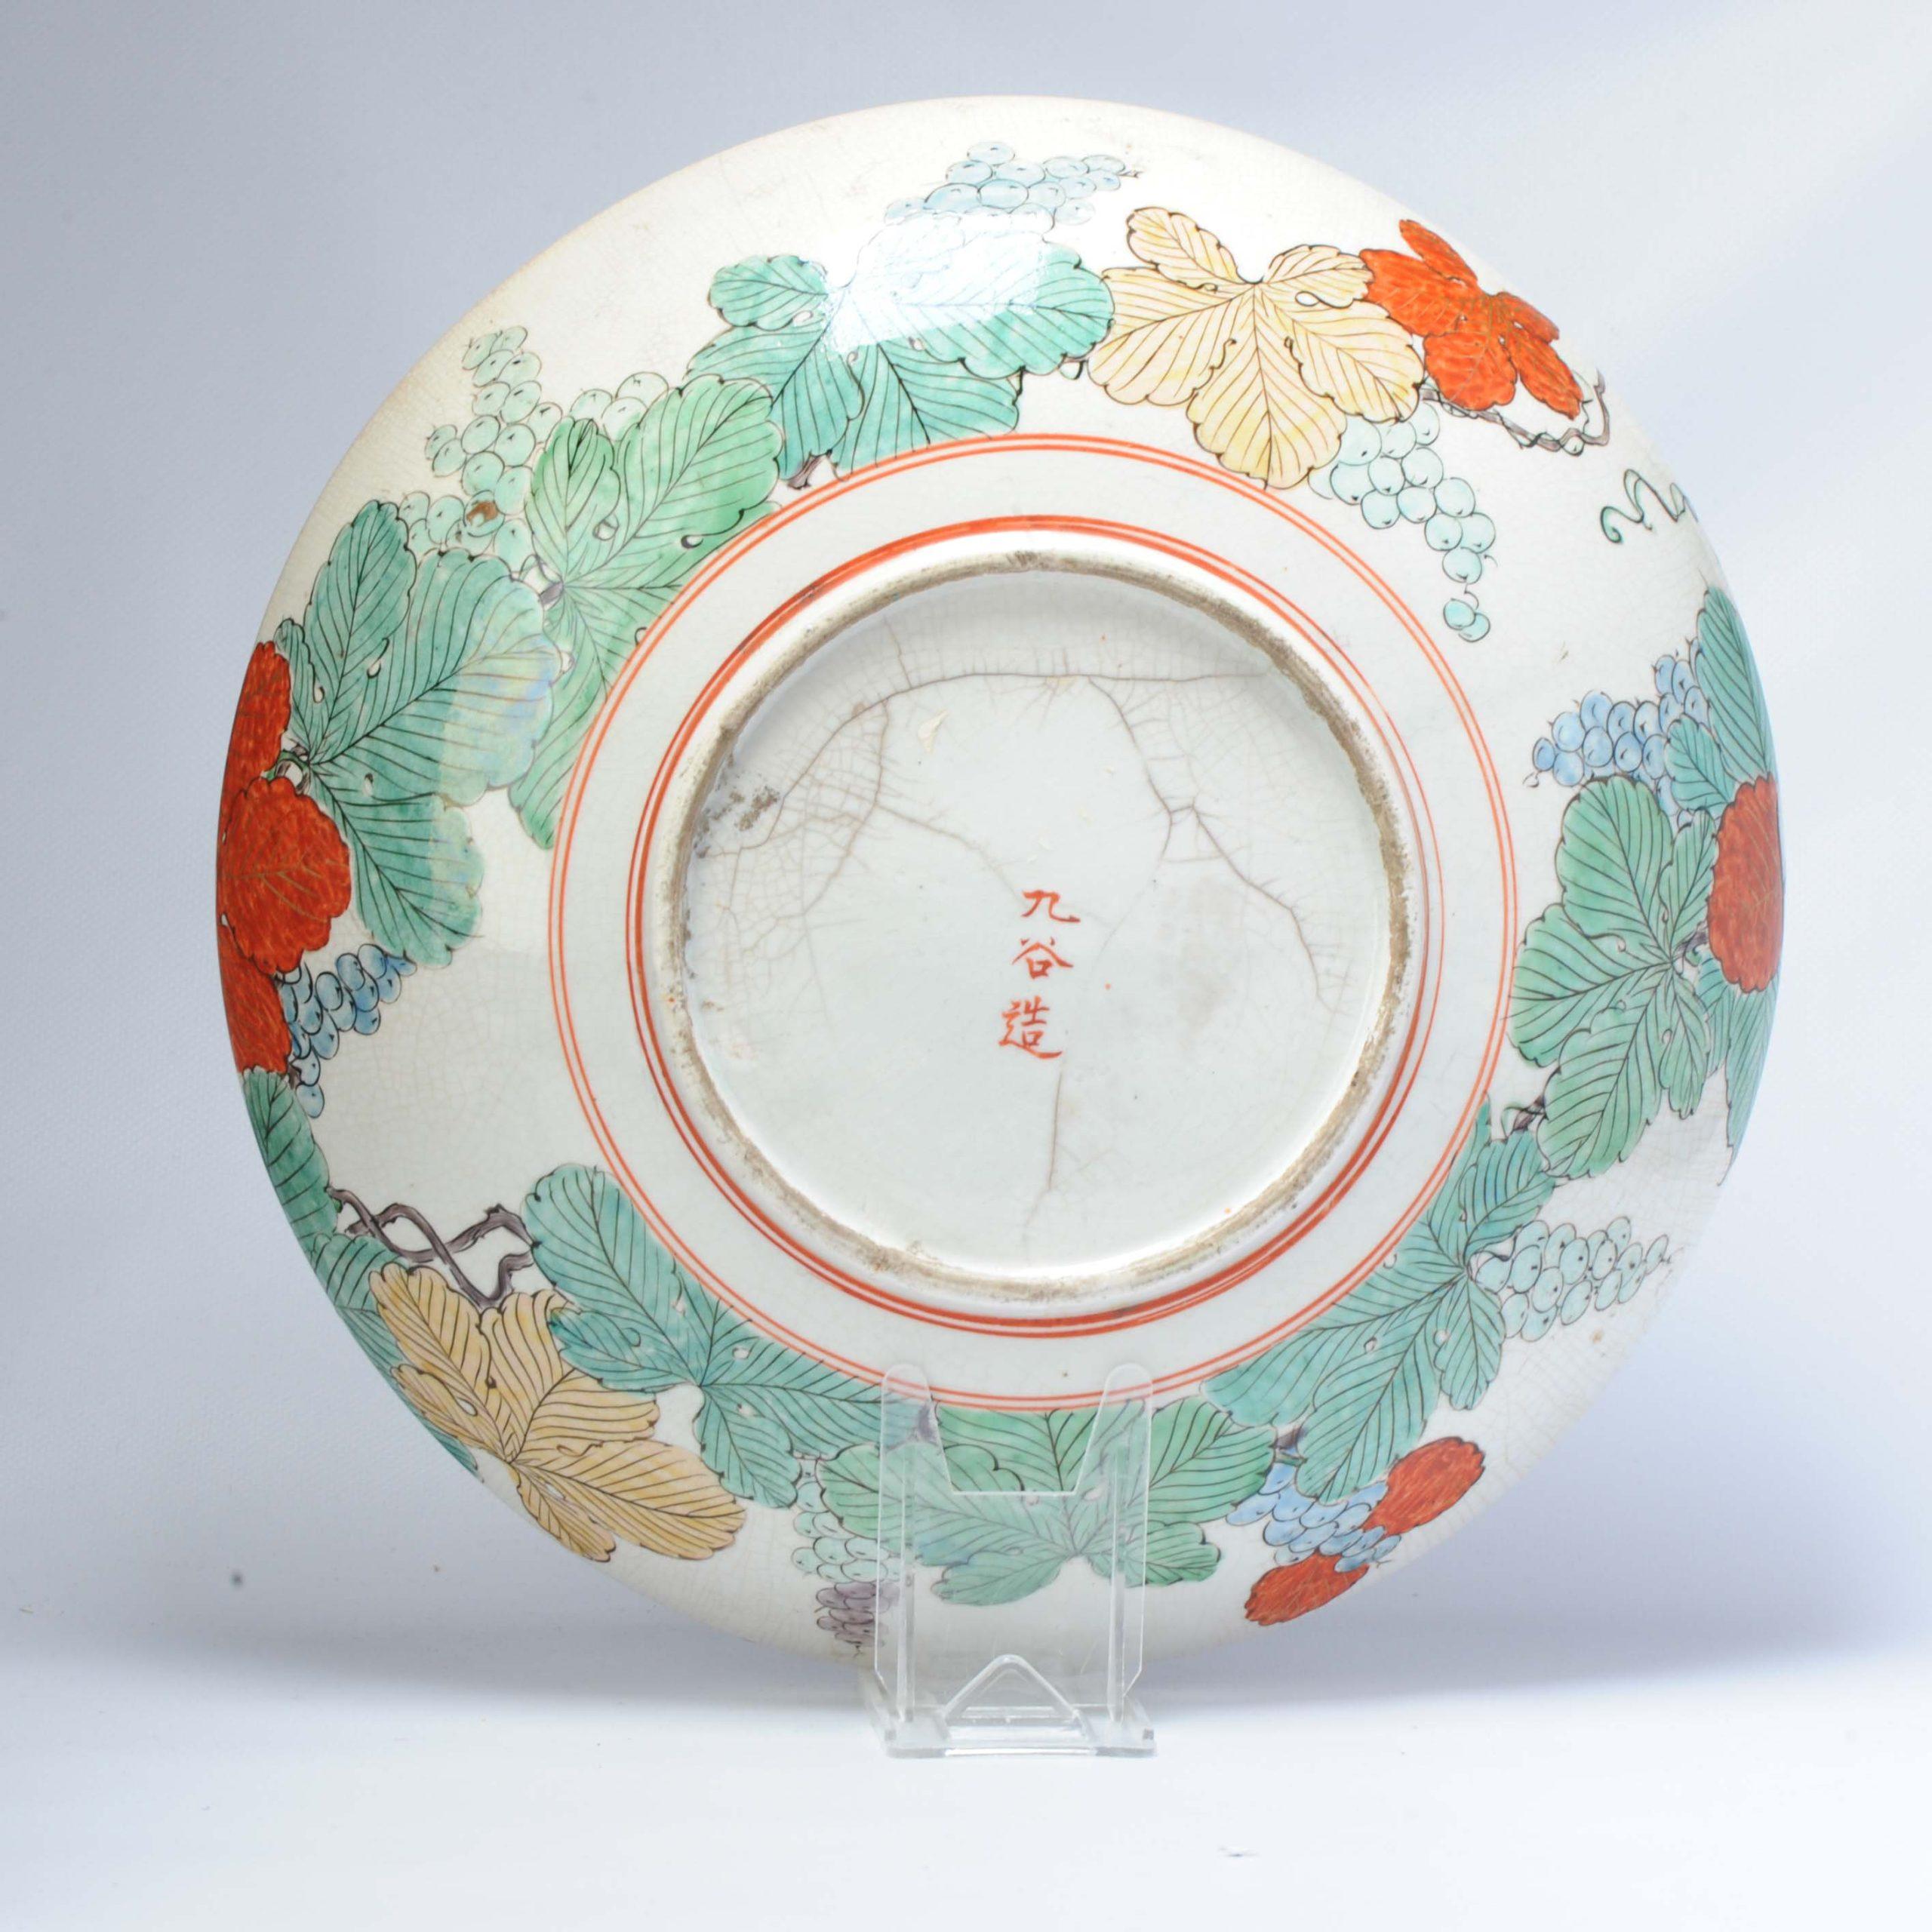 Very lovely pieces with a nicely painted scene of figures, Roosters in a mountainious landscape.

Kutani Shoza Style

The most renowned of these different Revived Kutani styles is the Shoza style which was developed by Kutani Shoza at the and of the